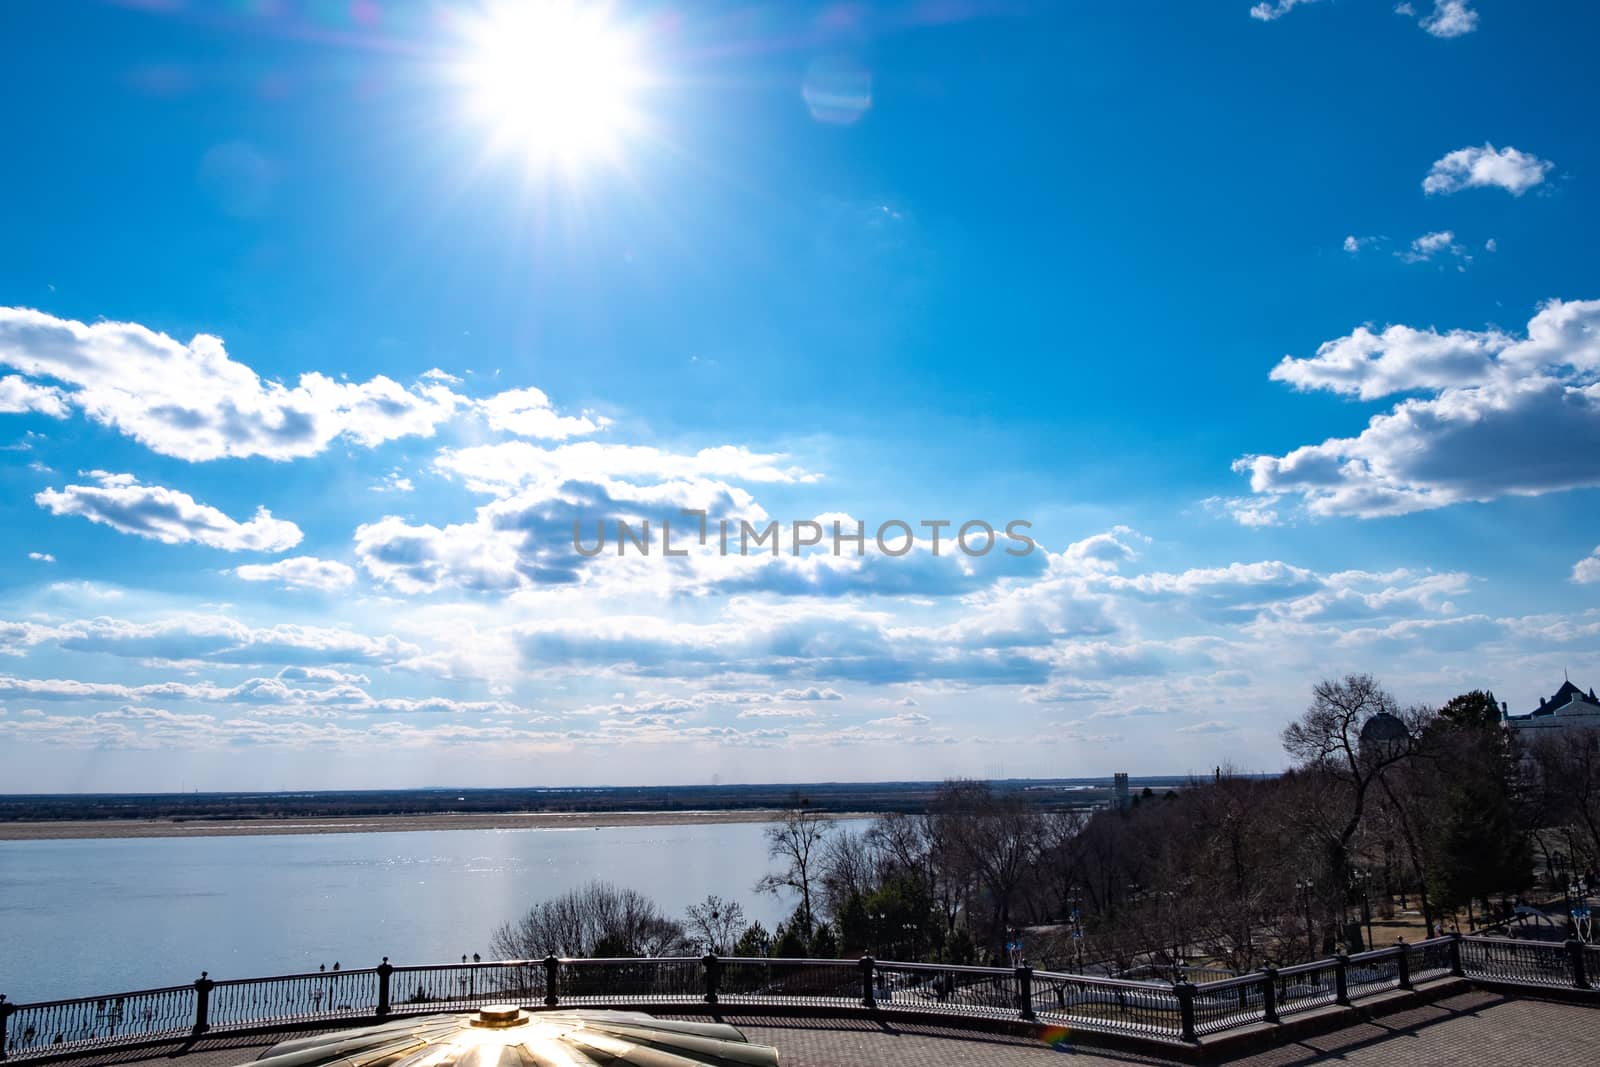 The spring Park is illuminated by the bright sun. View of a large and powerful river. On the bright blue sky beautiful white clouds.